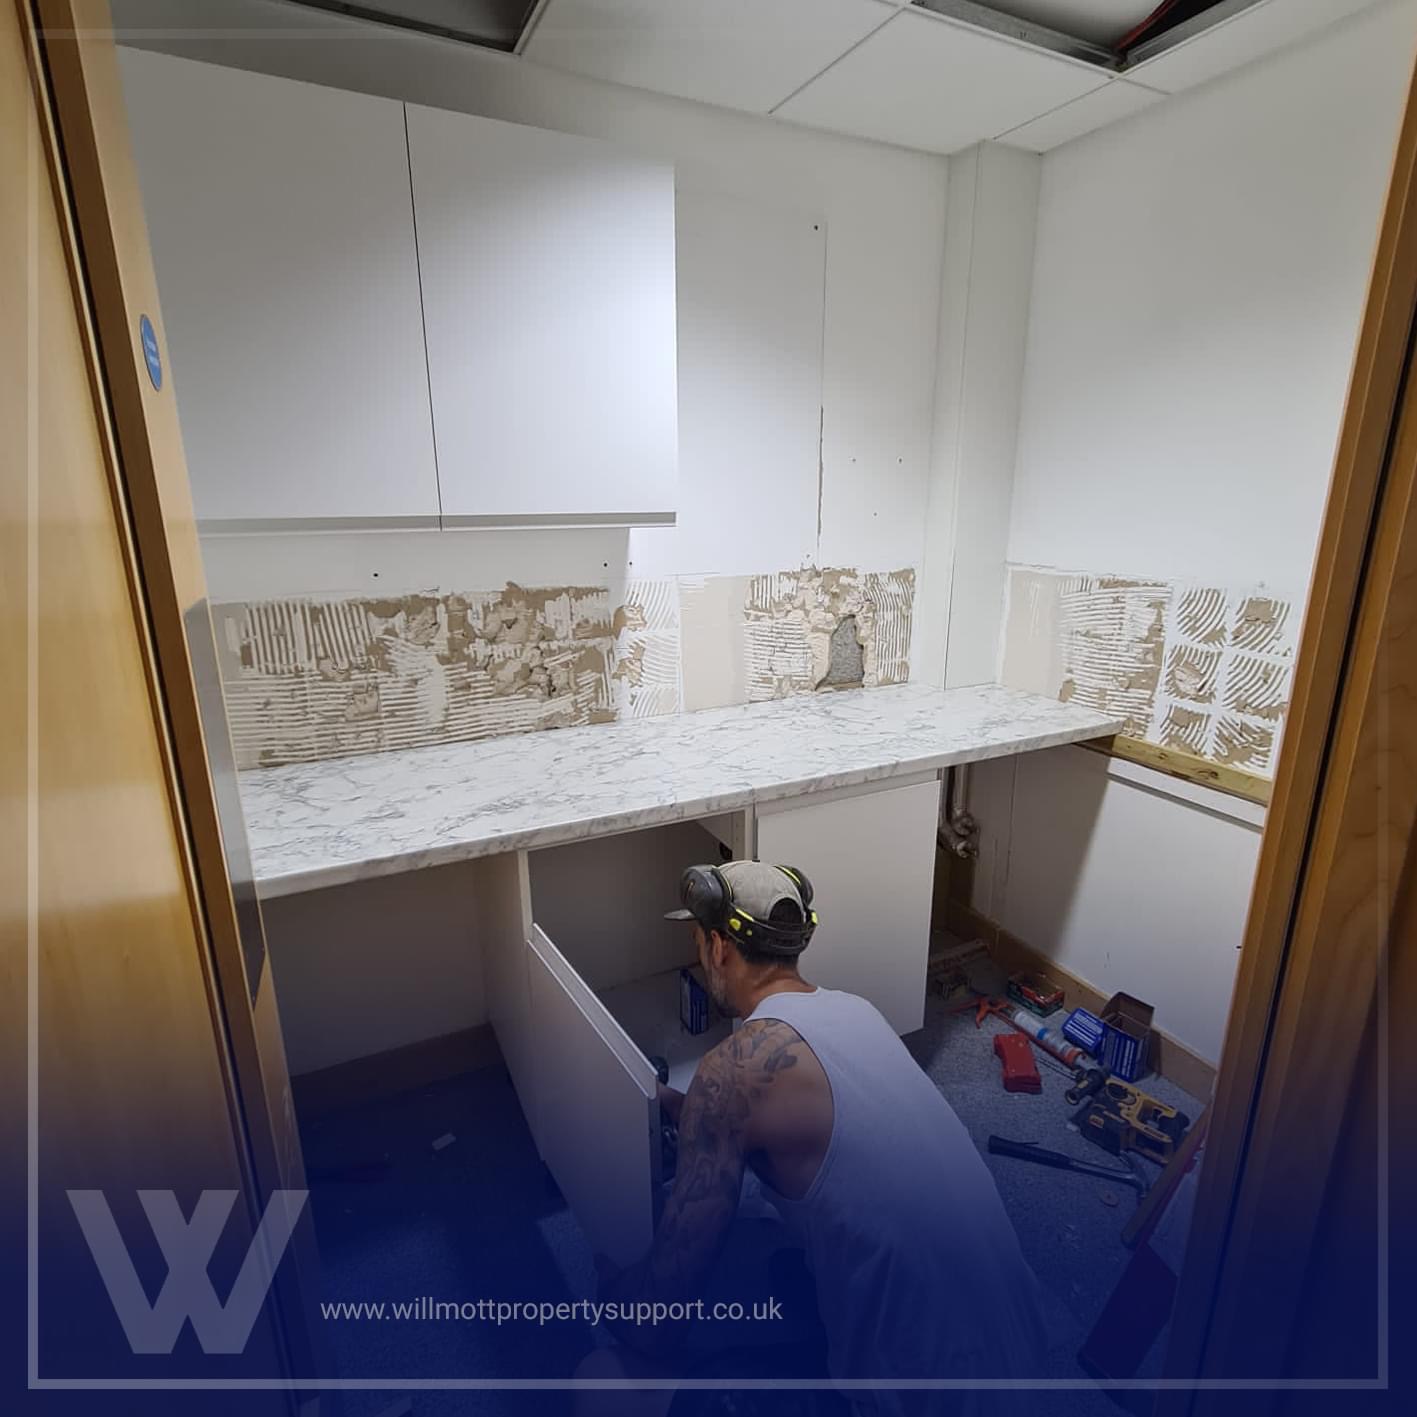 Tradesman kneeling down fitting a new kitchen cabinet